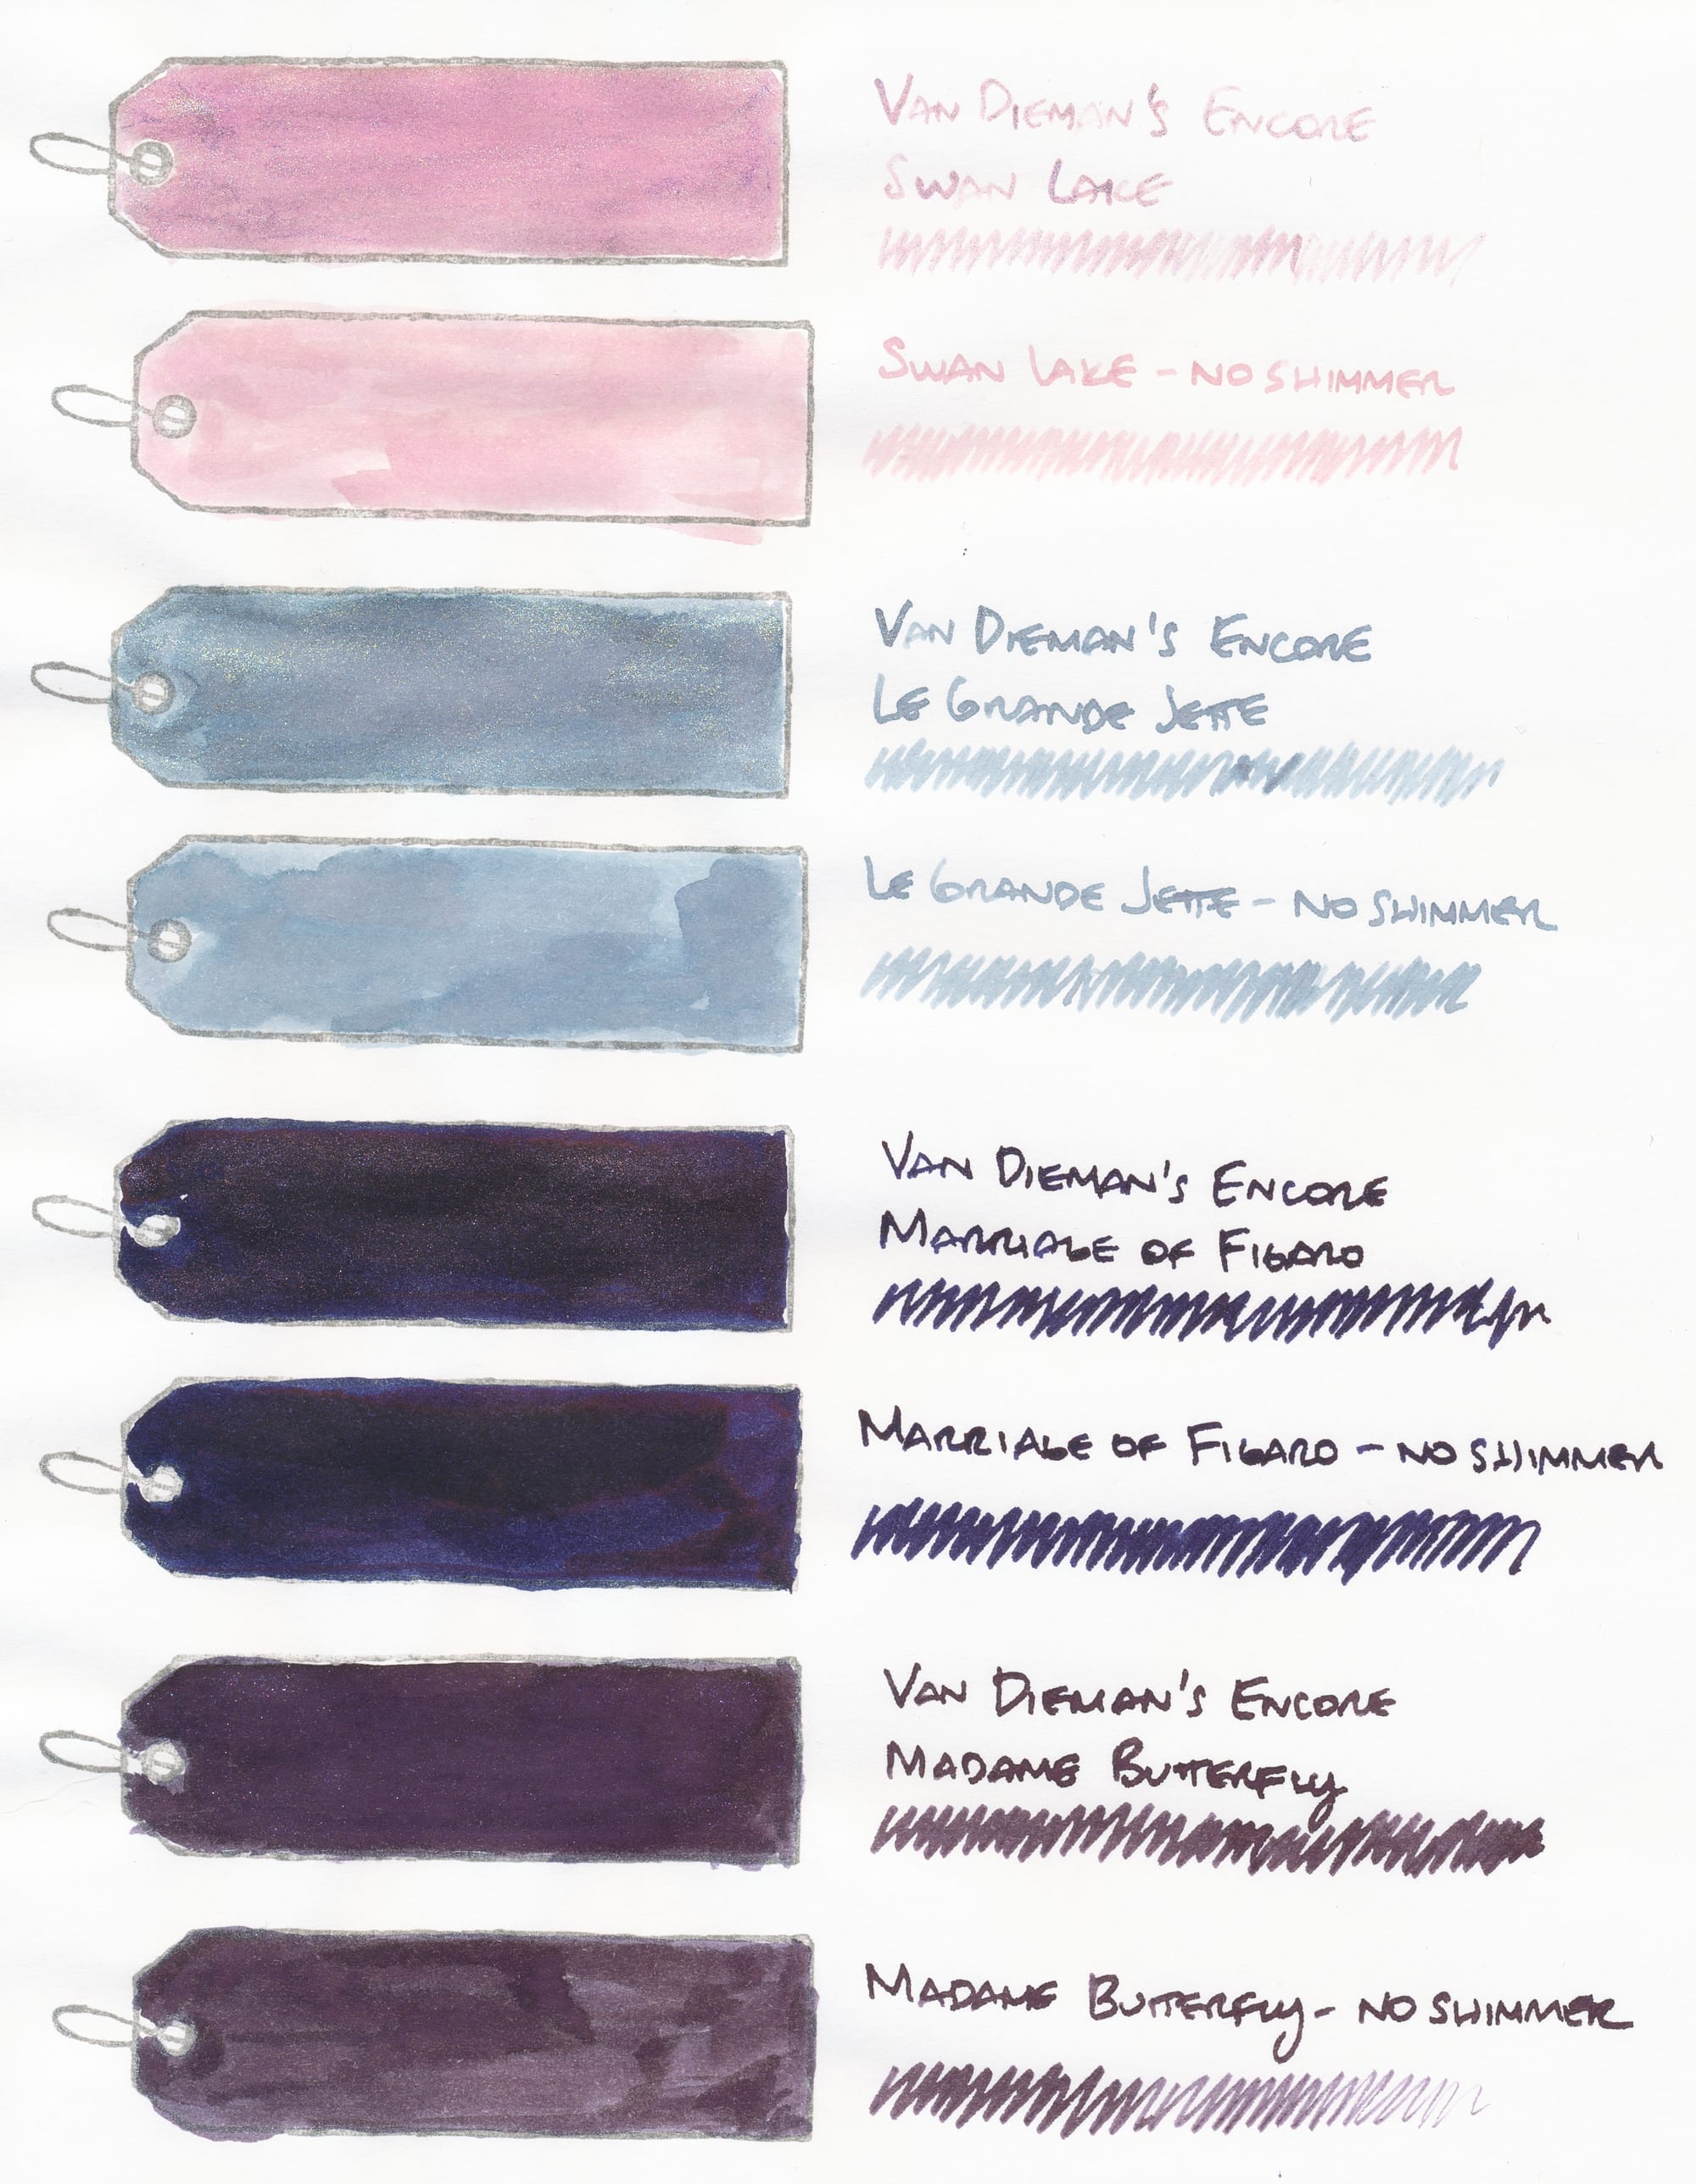 4 rubber stamped images of a long, narrow tag, filled in with ink swatches of 4 different inks: Swan Lake, a very, very light cherry blossom pink with pale yellow gold shimmer; Le Grande Jette, a medium-light sky blue with pink undertones and pale yellow gold shimmer; Marriage of Figaro, a very dark blurple with strong red sheen and dark magenta shimmer; and Madame Butterfly, a dark purple gray with dark black or green sheen and dark magenta shimmer